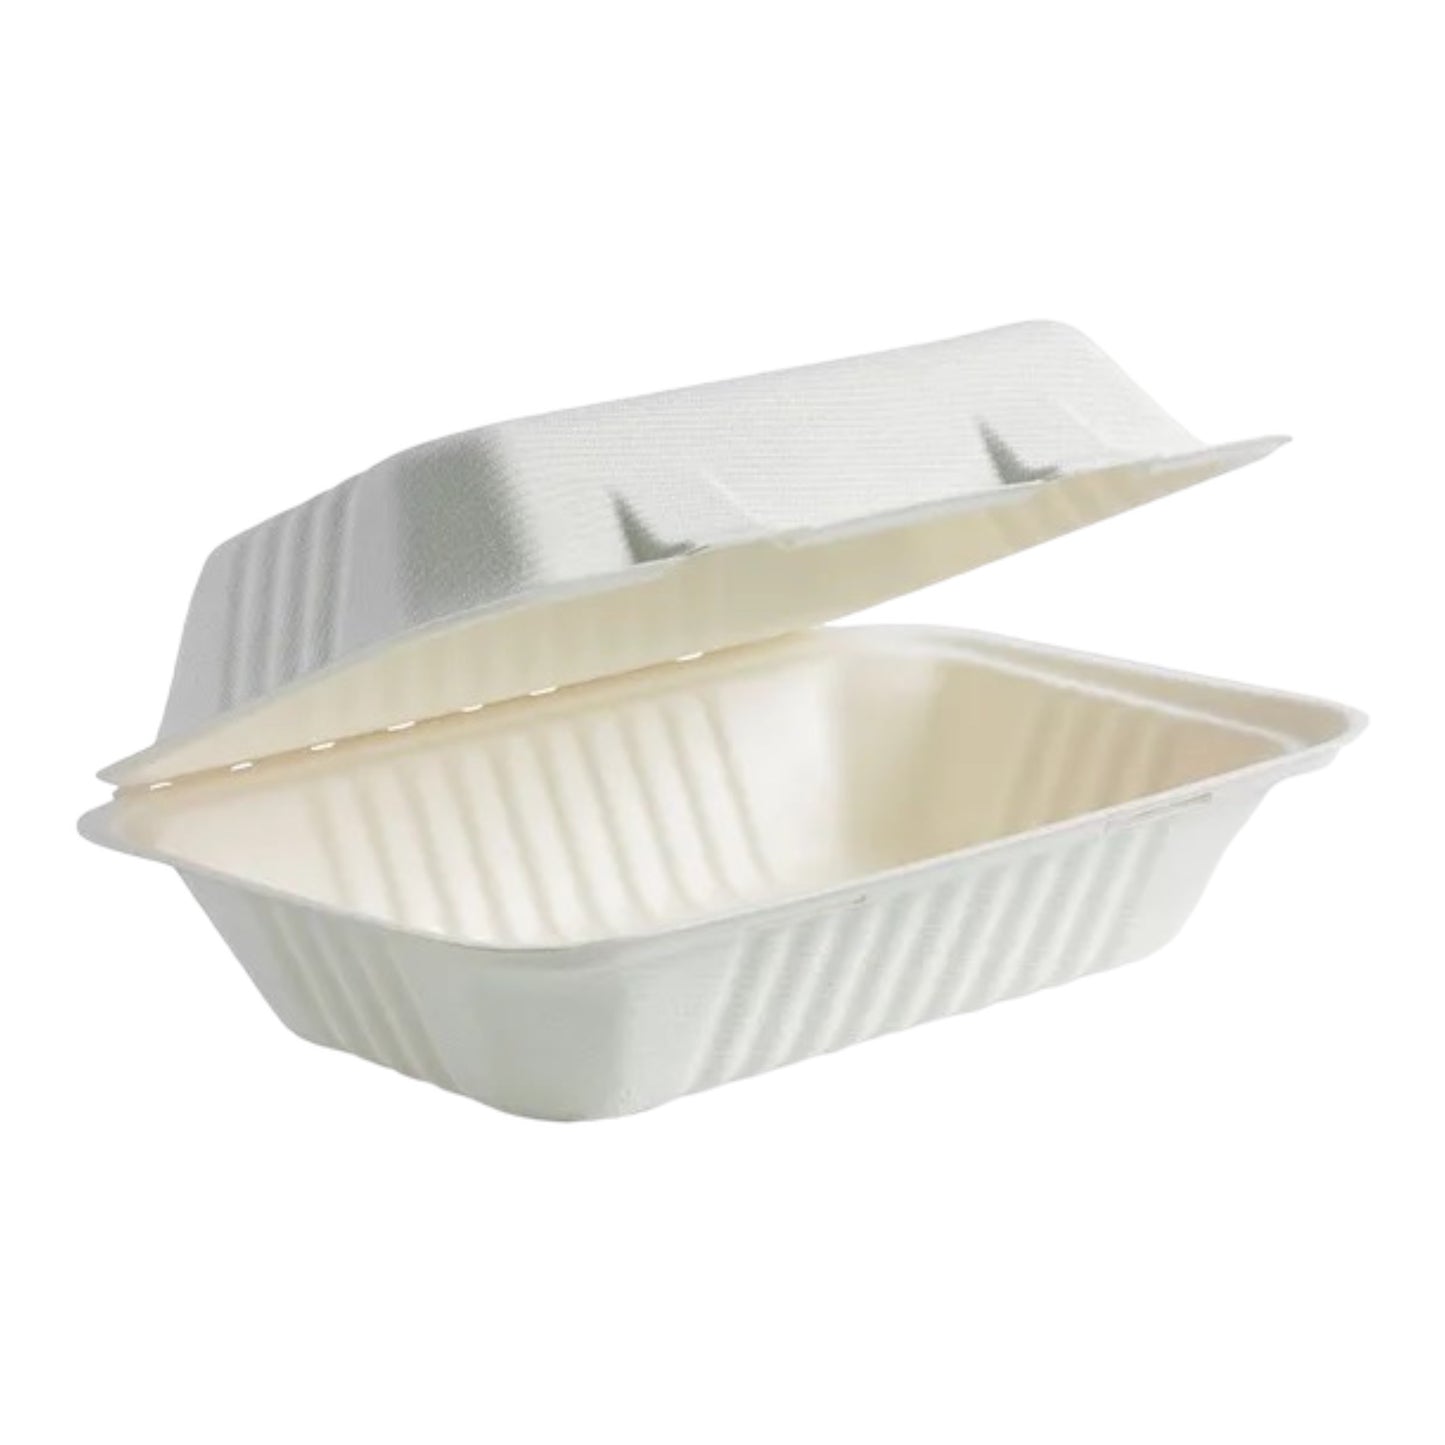 9x6x3 Bagasse Lunch Box Clamshell9x6x3 Bagasse Lunch Box Clamshell